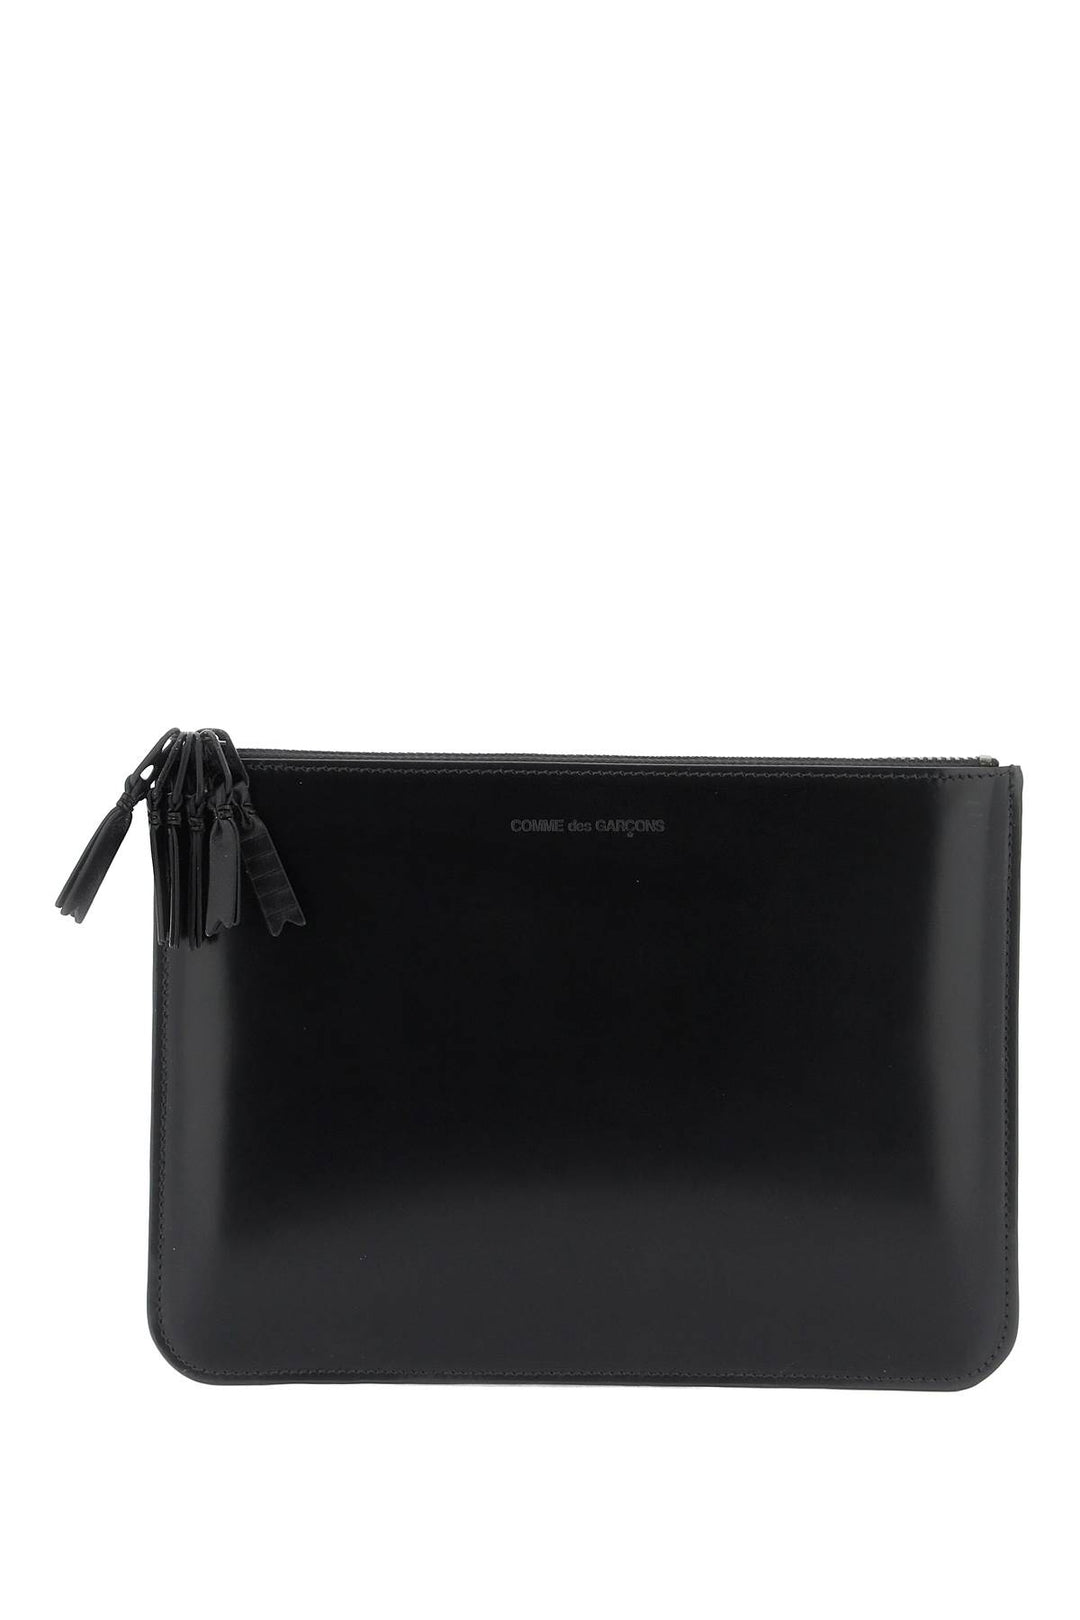 Comme Des Garcons Wallet Brushed Leather Multi Zip Pouch With   Nero